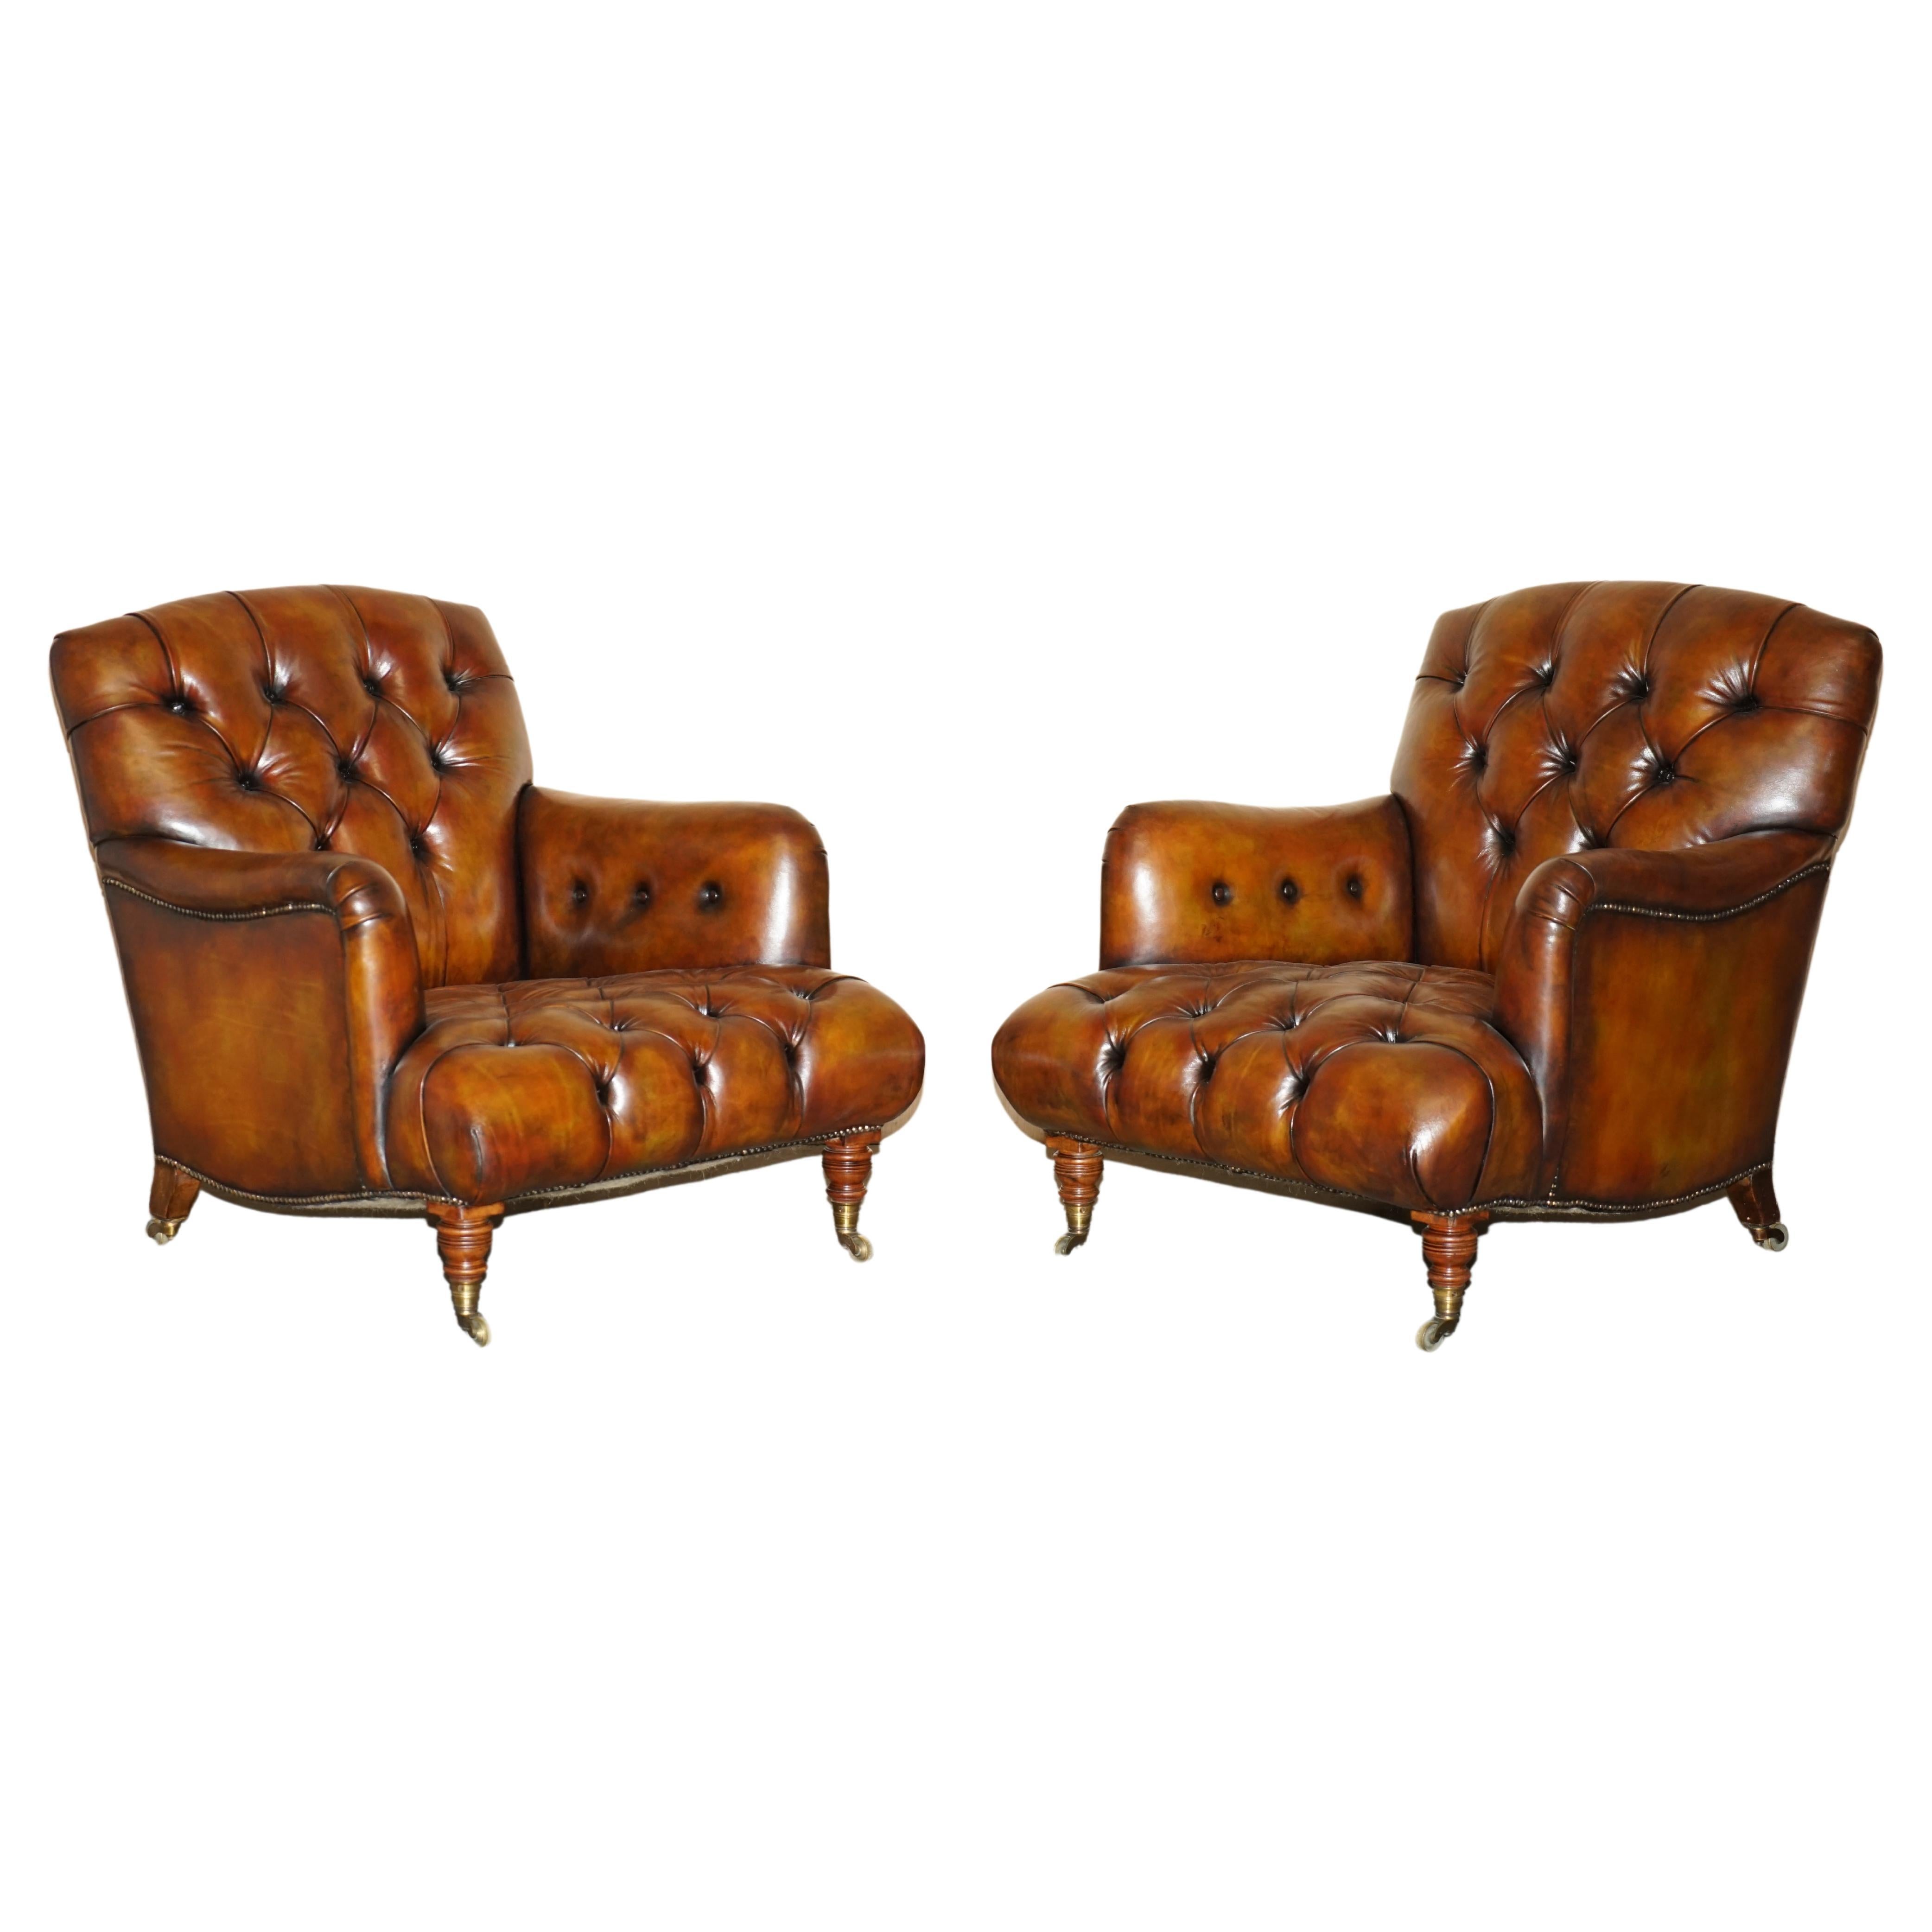 Pair of Antique Howard & Son's Bridgewater Brown Leather Chesterfield Armchairs For Sale